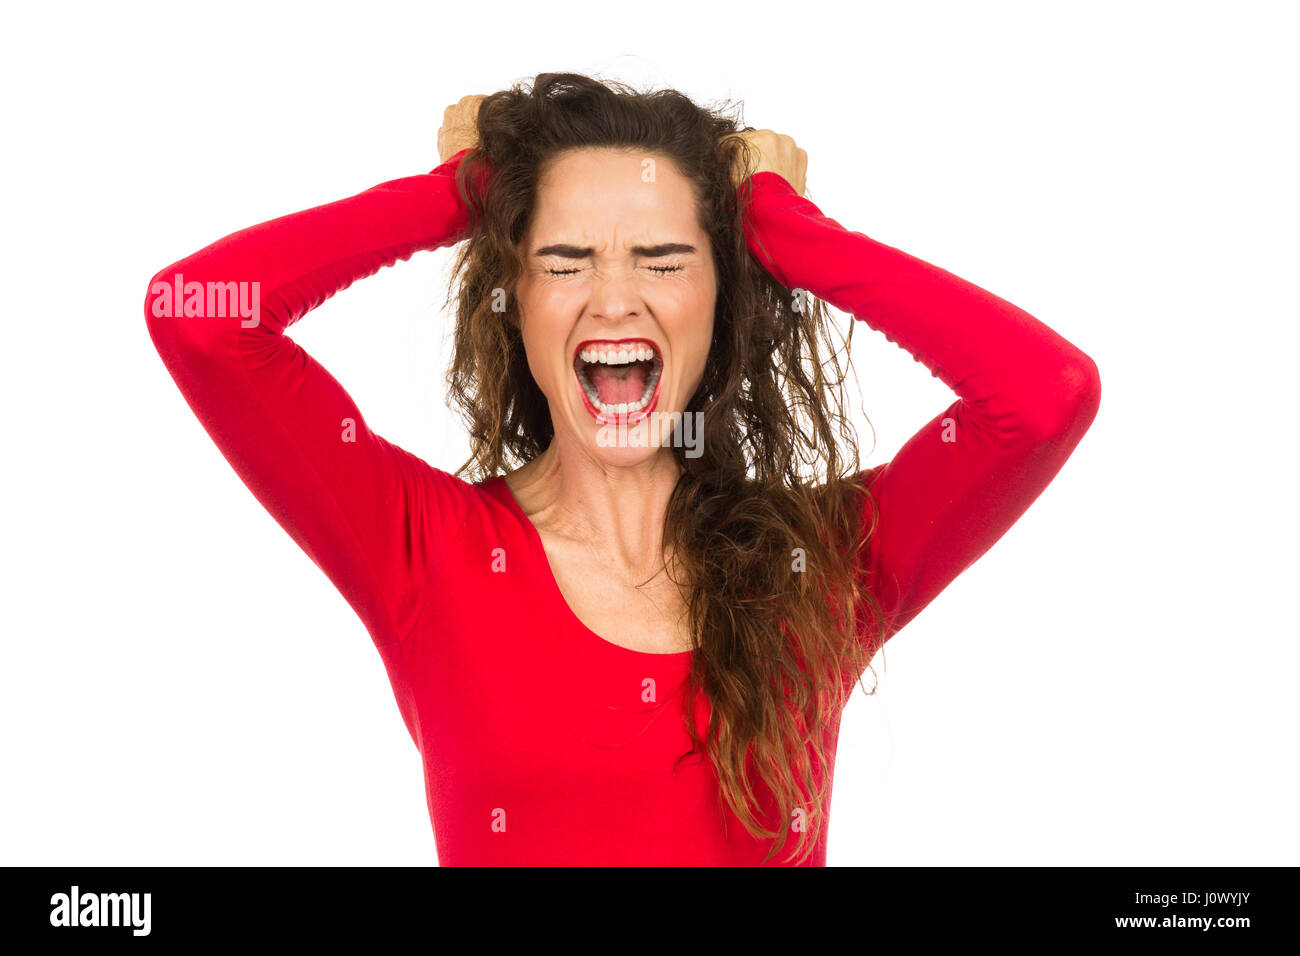 A very angry and frustrated woman is pulling her. Isolated on white. Stock Photo